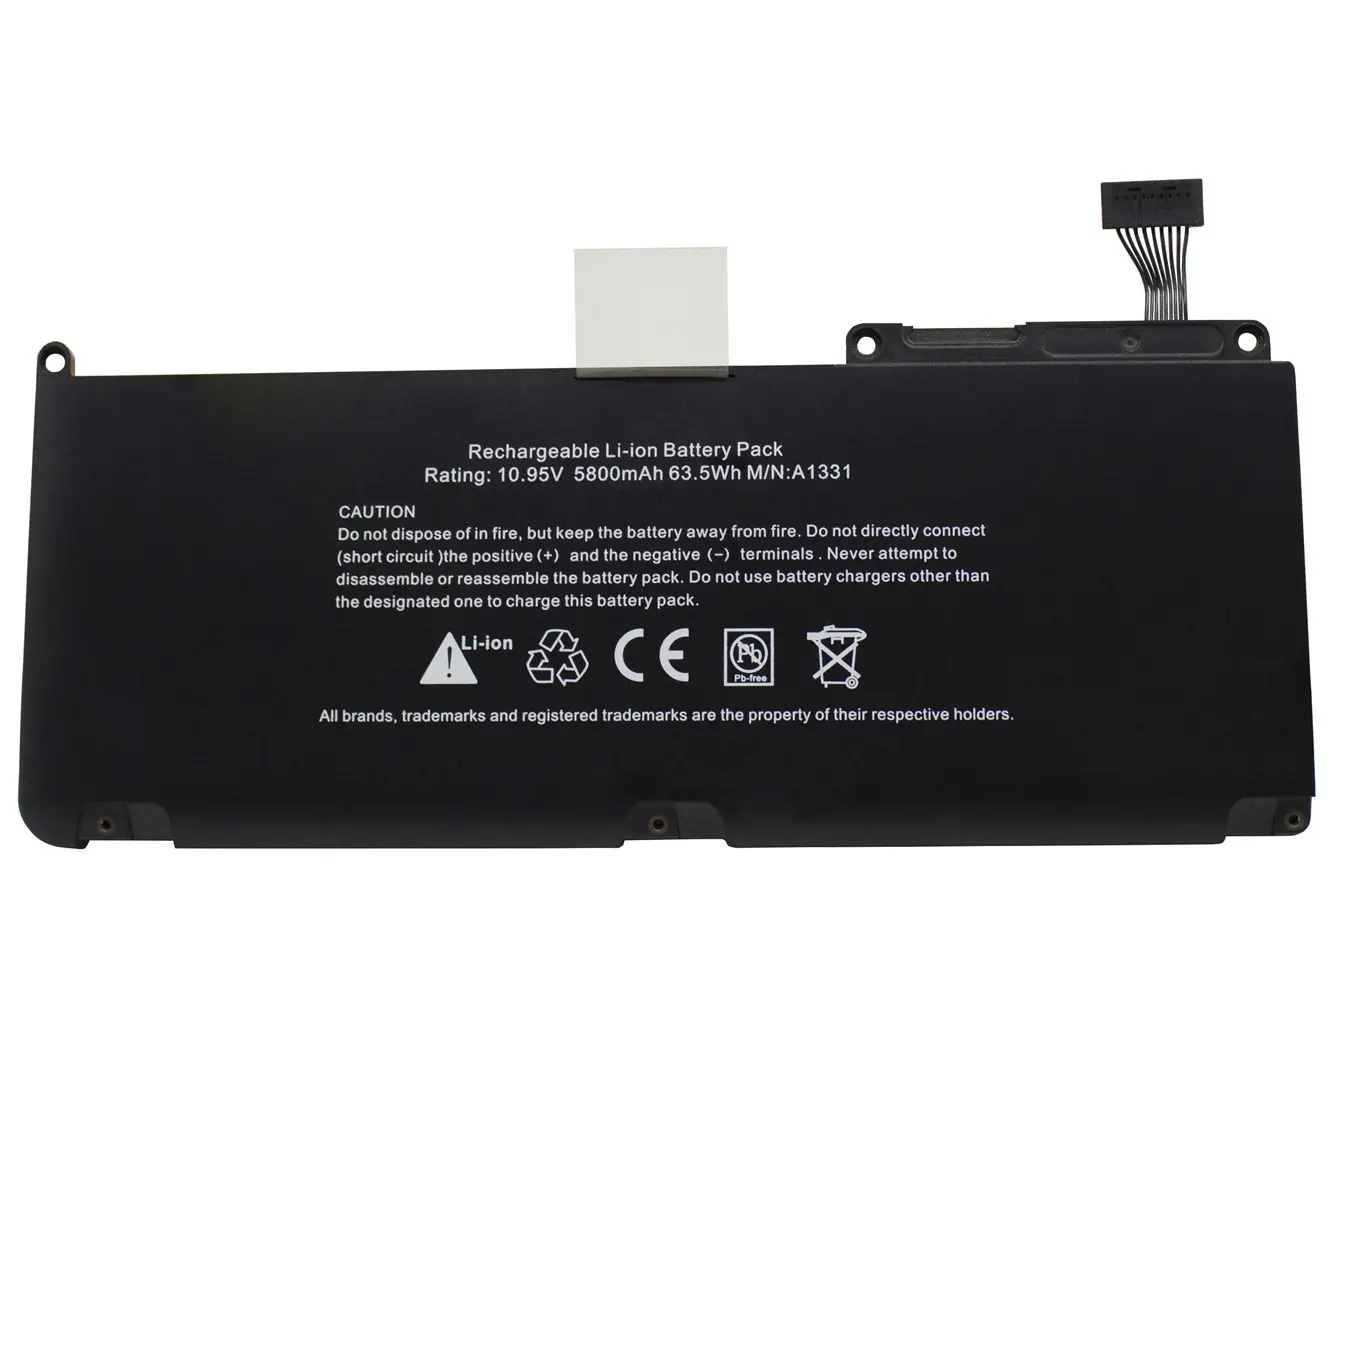 laptop battery for macbook 13'inch A1331 A1342 Late 2009/Mid 2010 year 10.95V 63.5Wh 5800mAh Notebook computer manufacturer